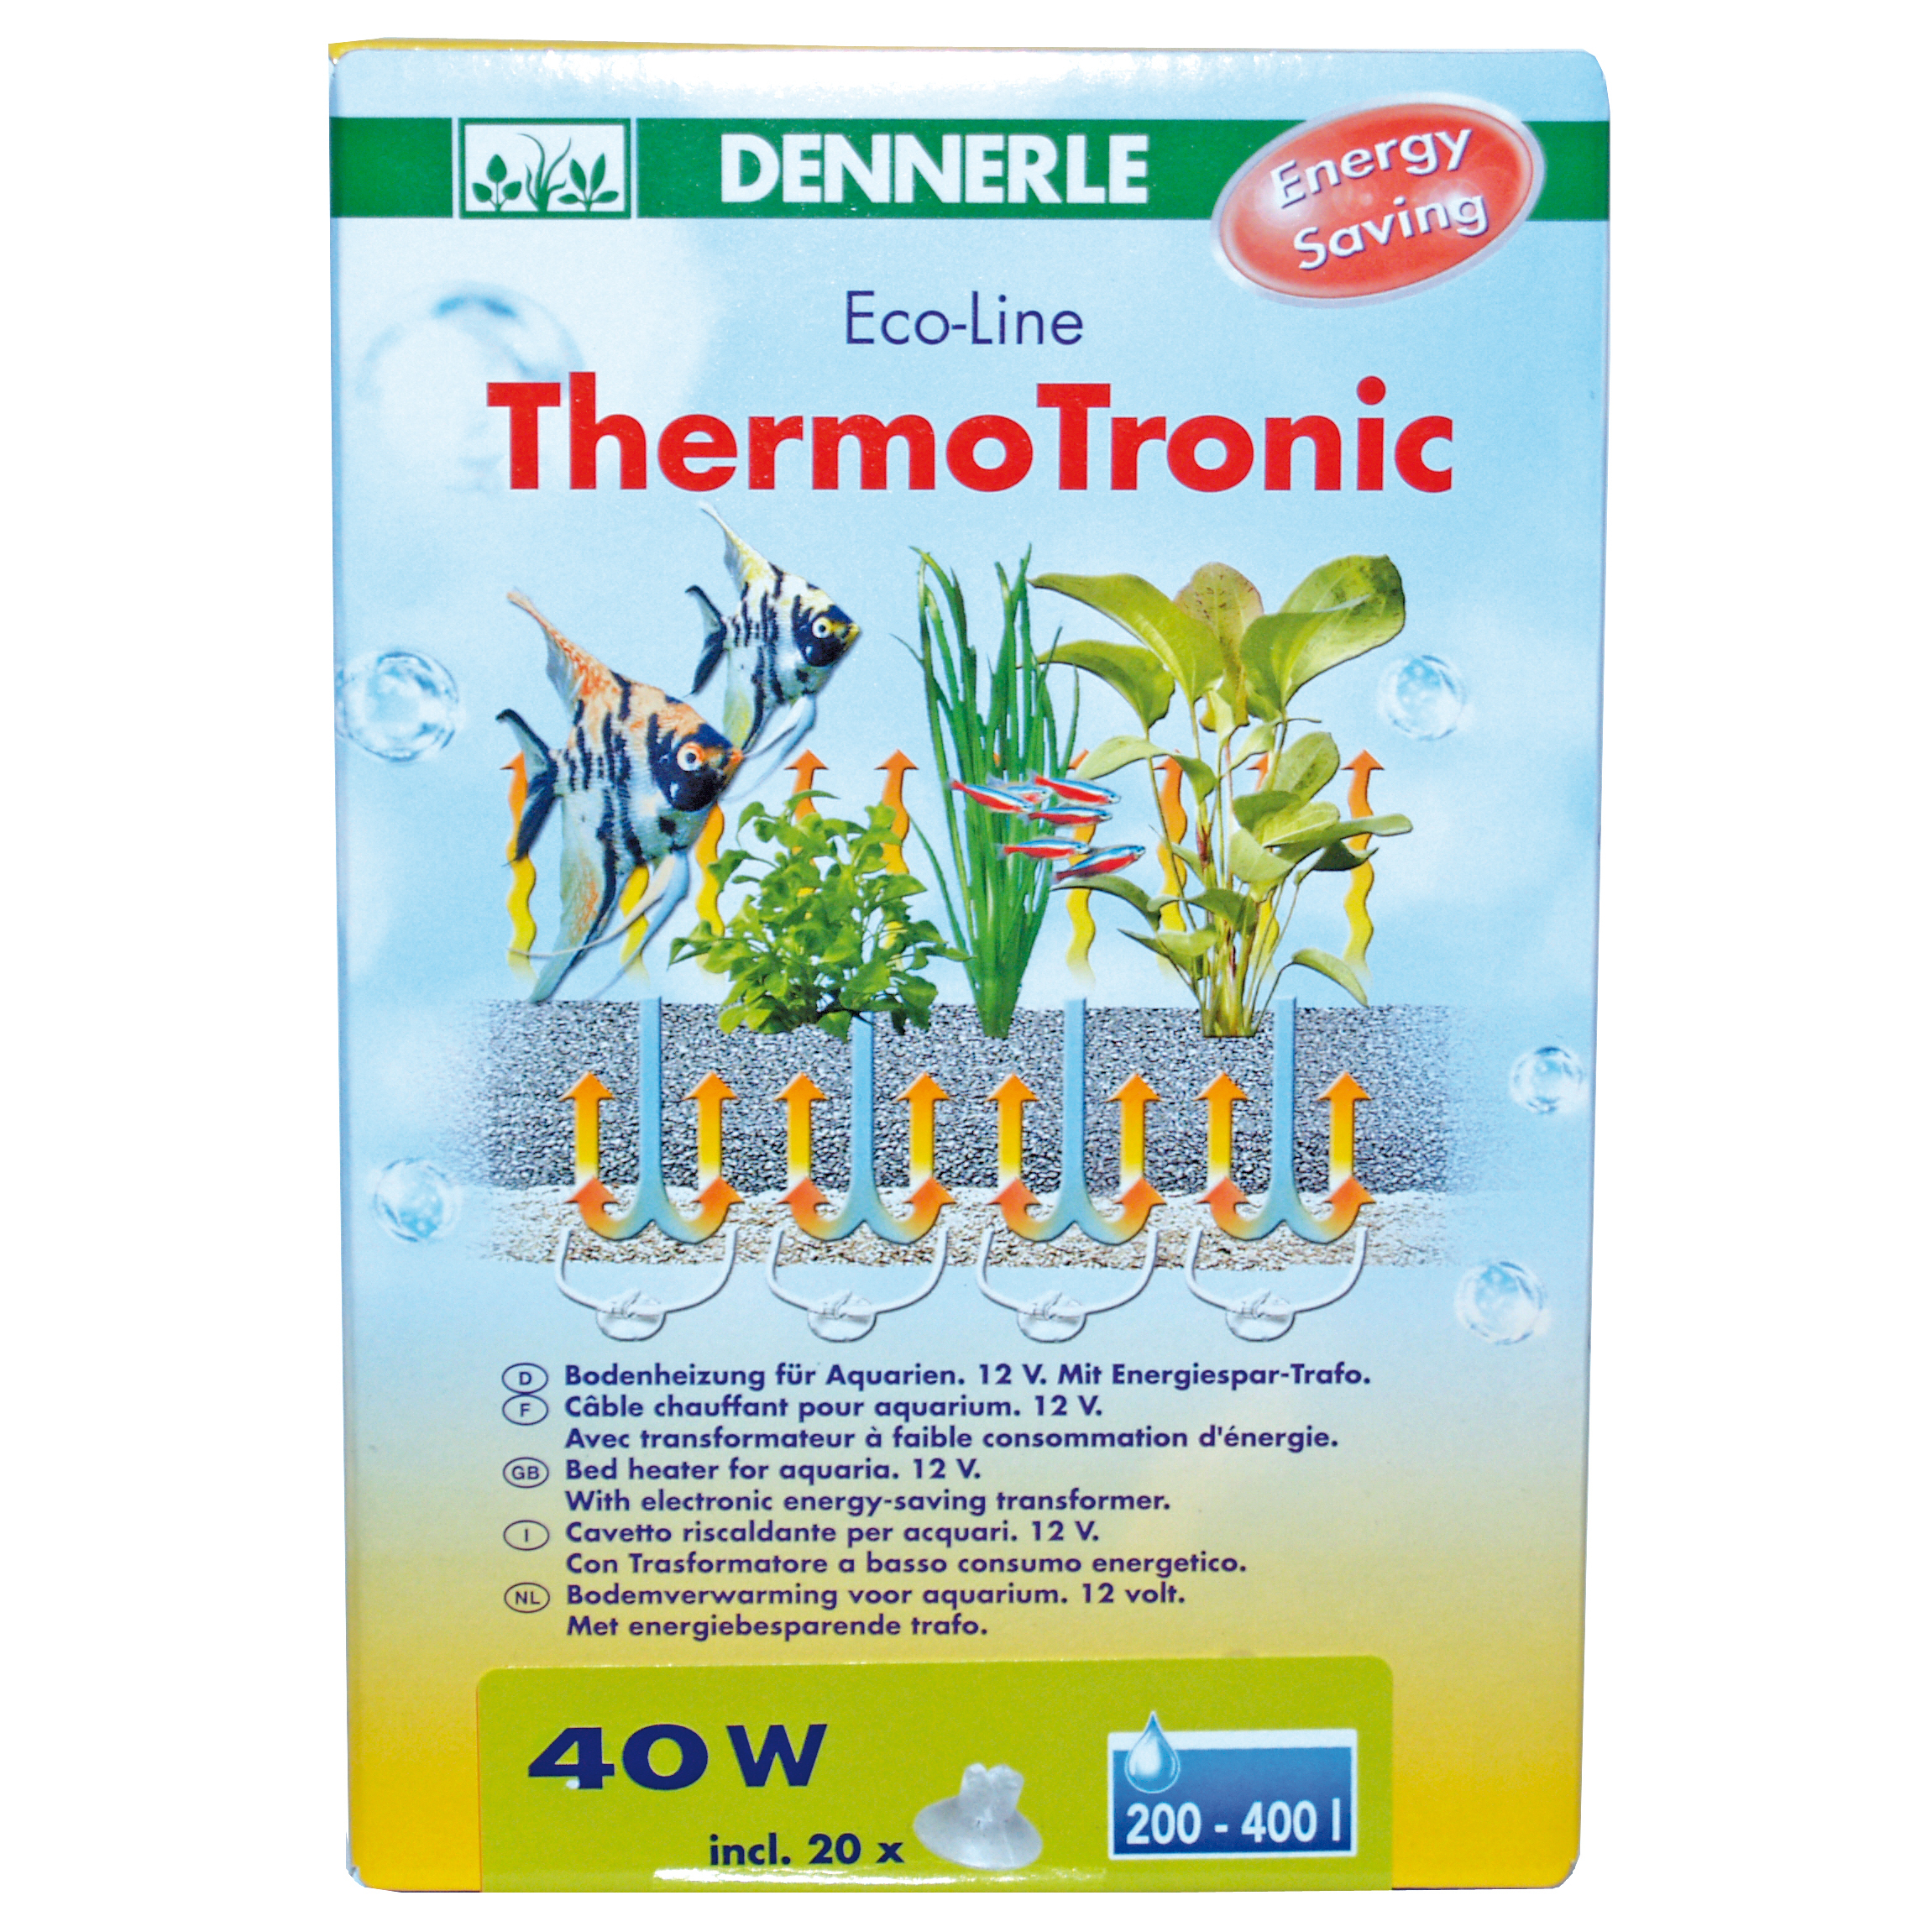 Dennerle Eco-Line ThermoTronic Bodenfluter 10